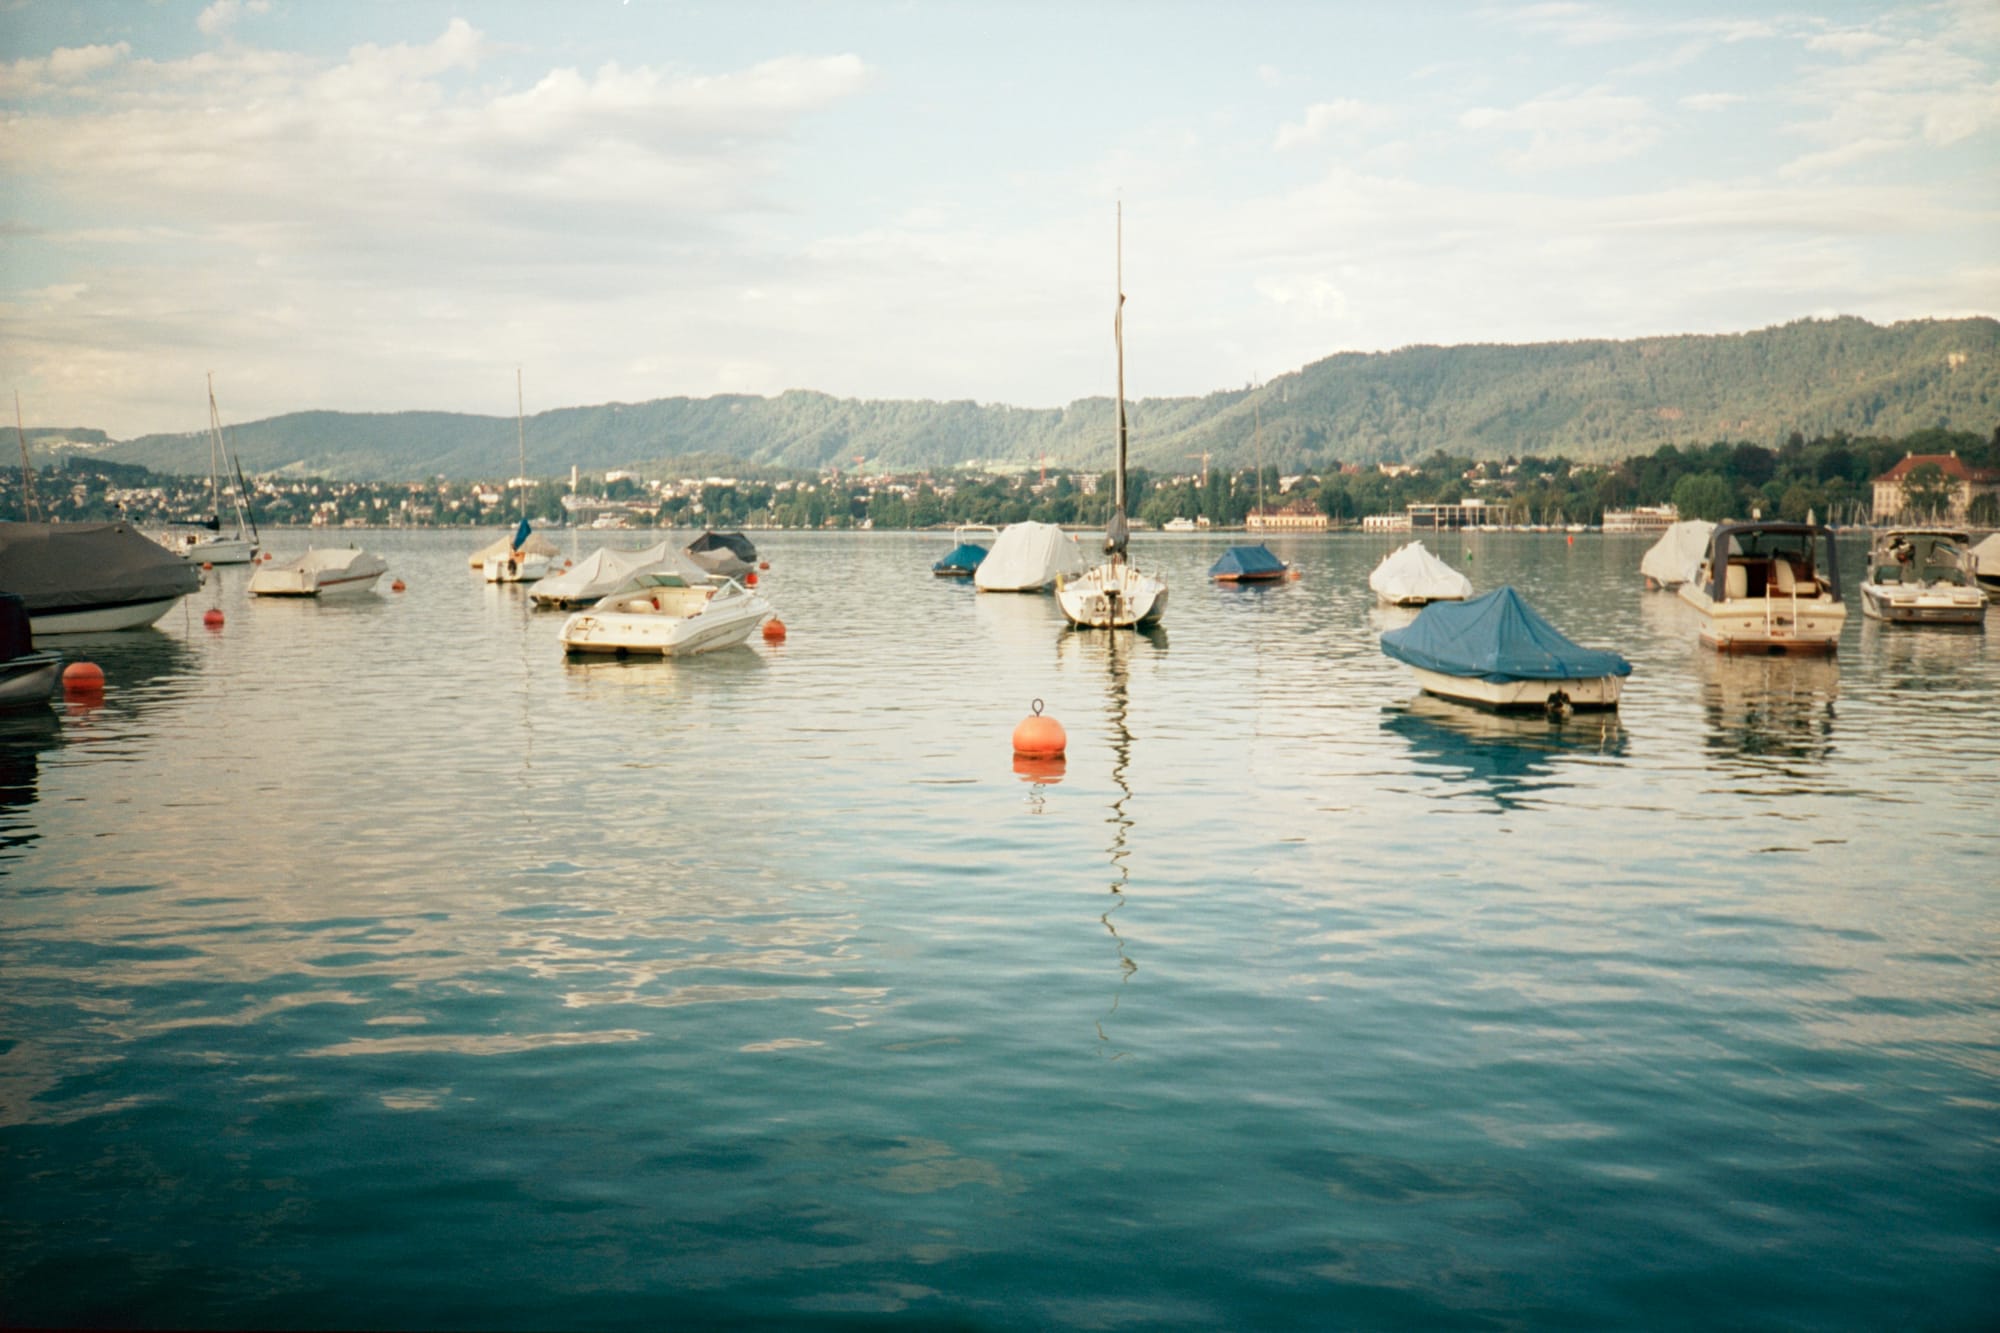 Lake Zürich, a clear, stunning blue. Small boats, yachts, and buoys rest on the surface. The sky is blue and fluffy. All is peaceful.